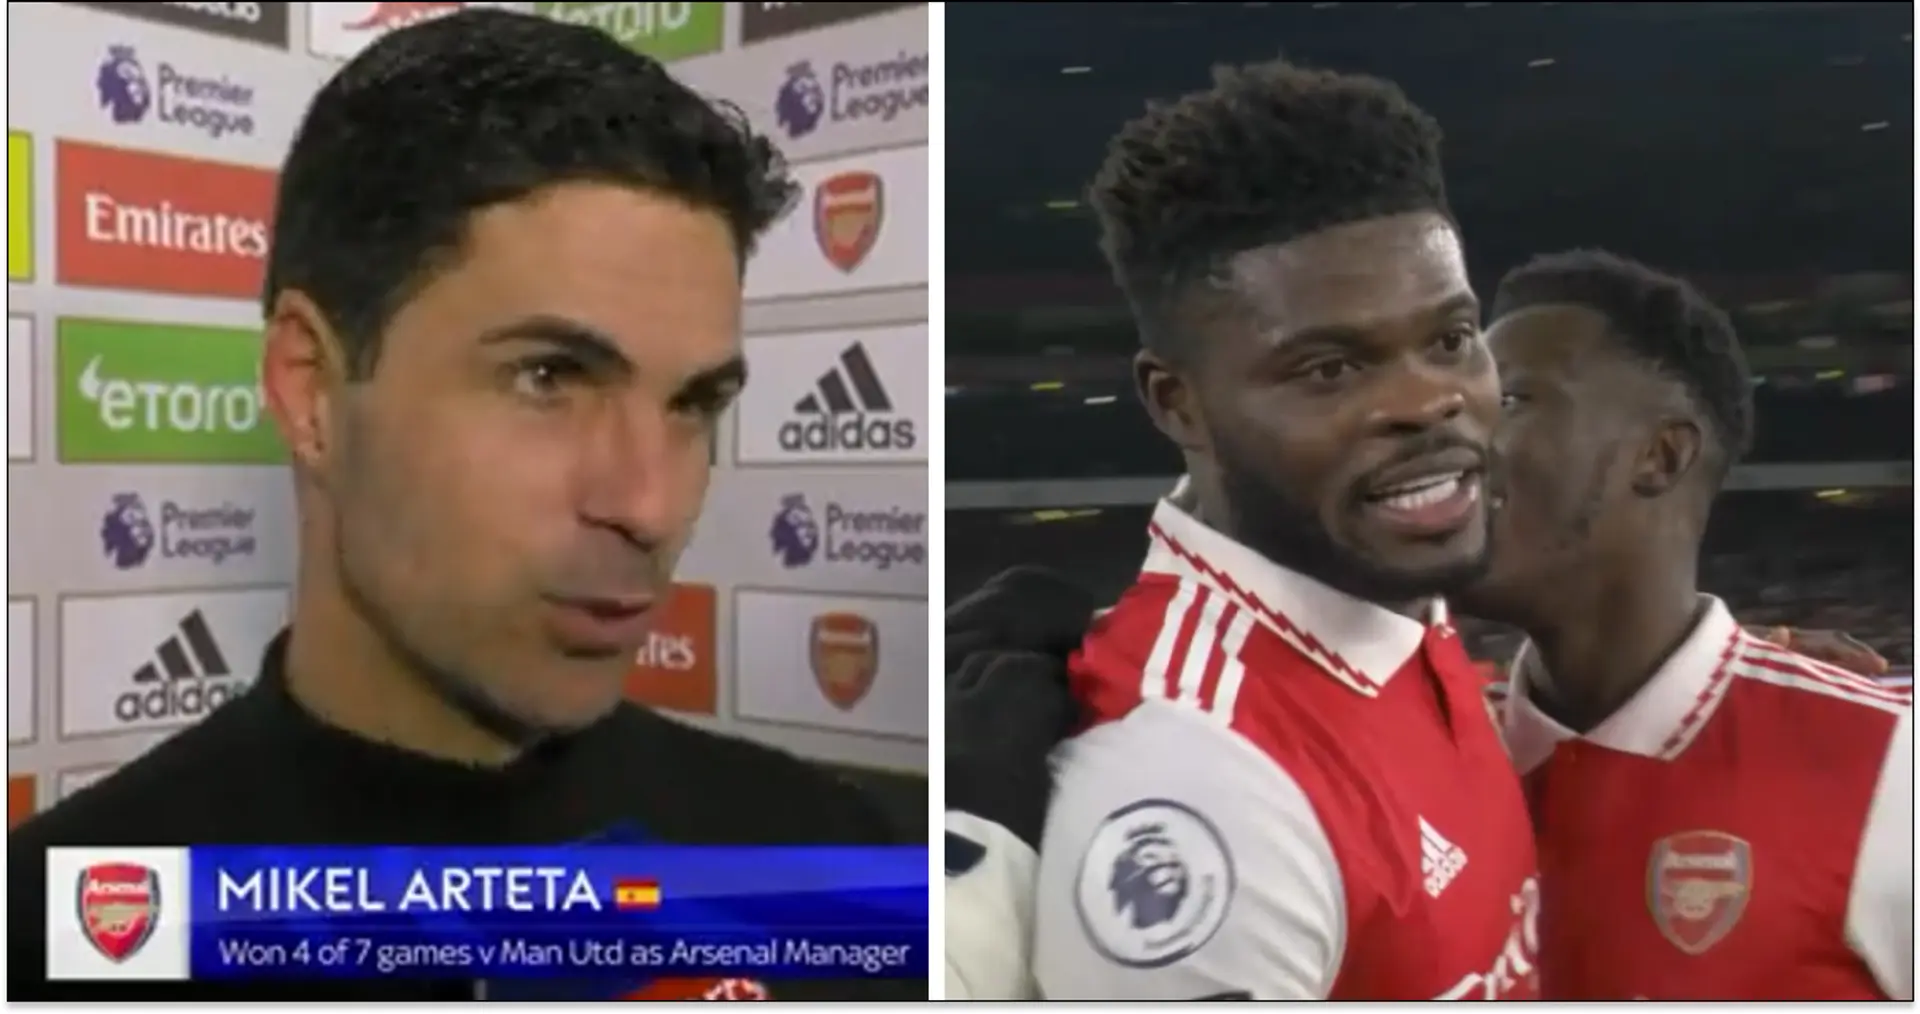 'It doesn't get much better than that': Arteta reacts to United triumph